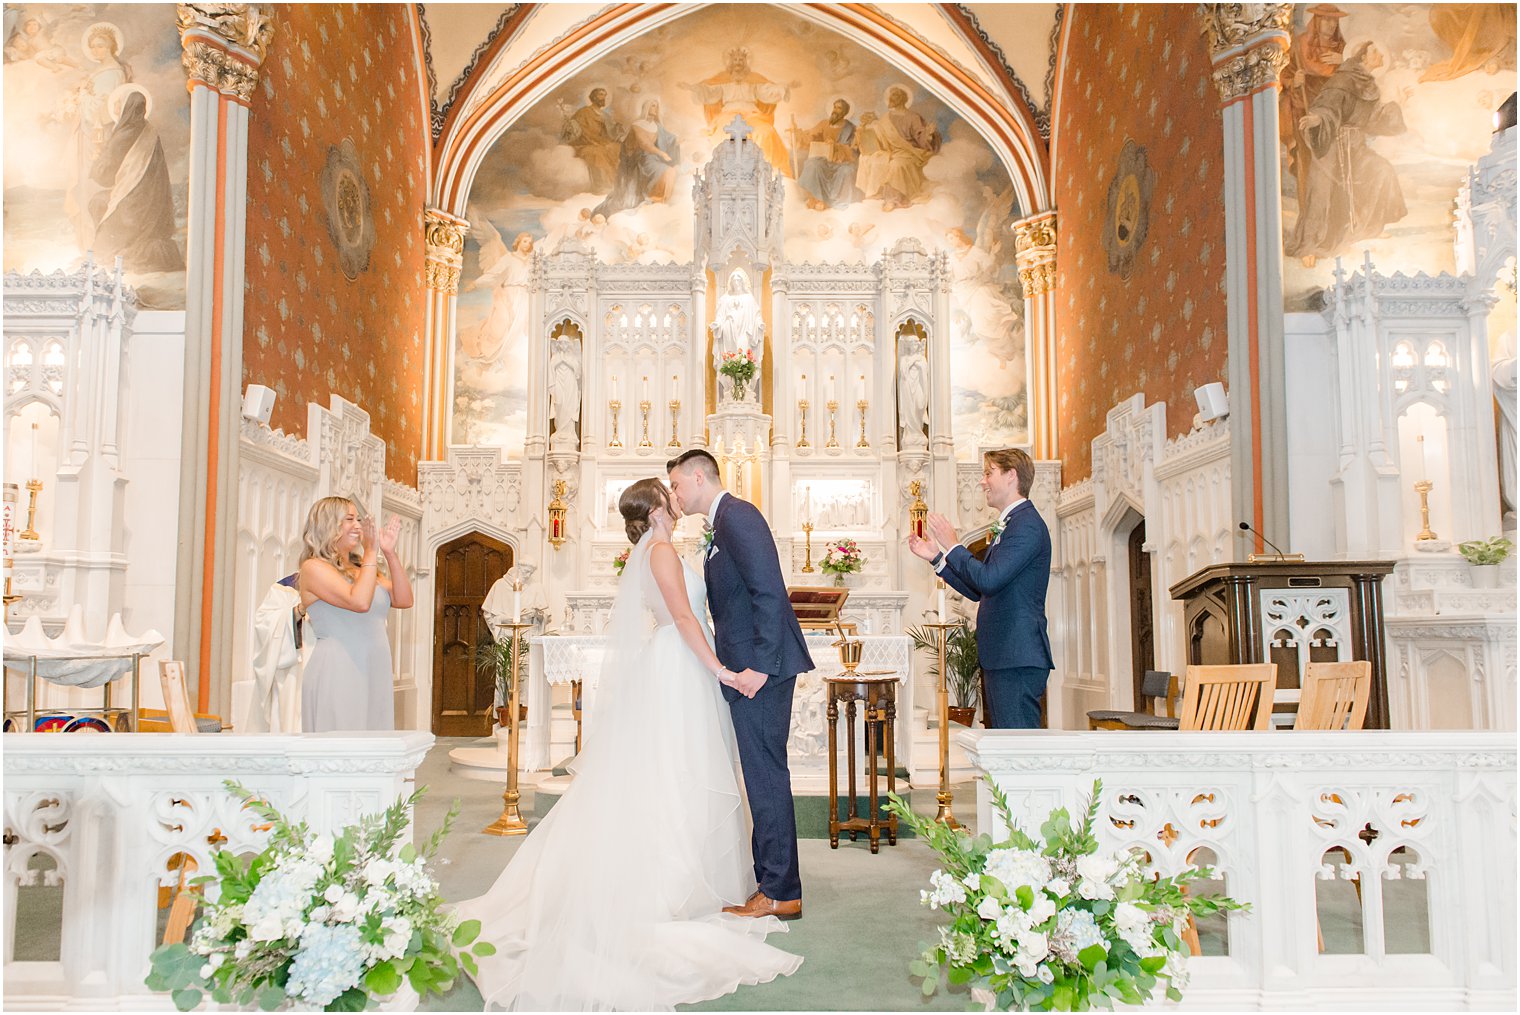 bride and groom kiss during traditional church wedding ceremony at St. Peter's Church